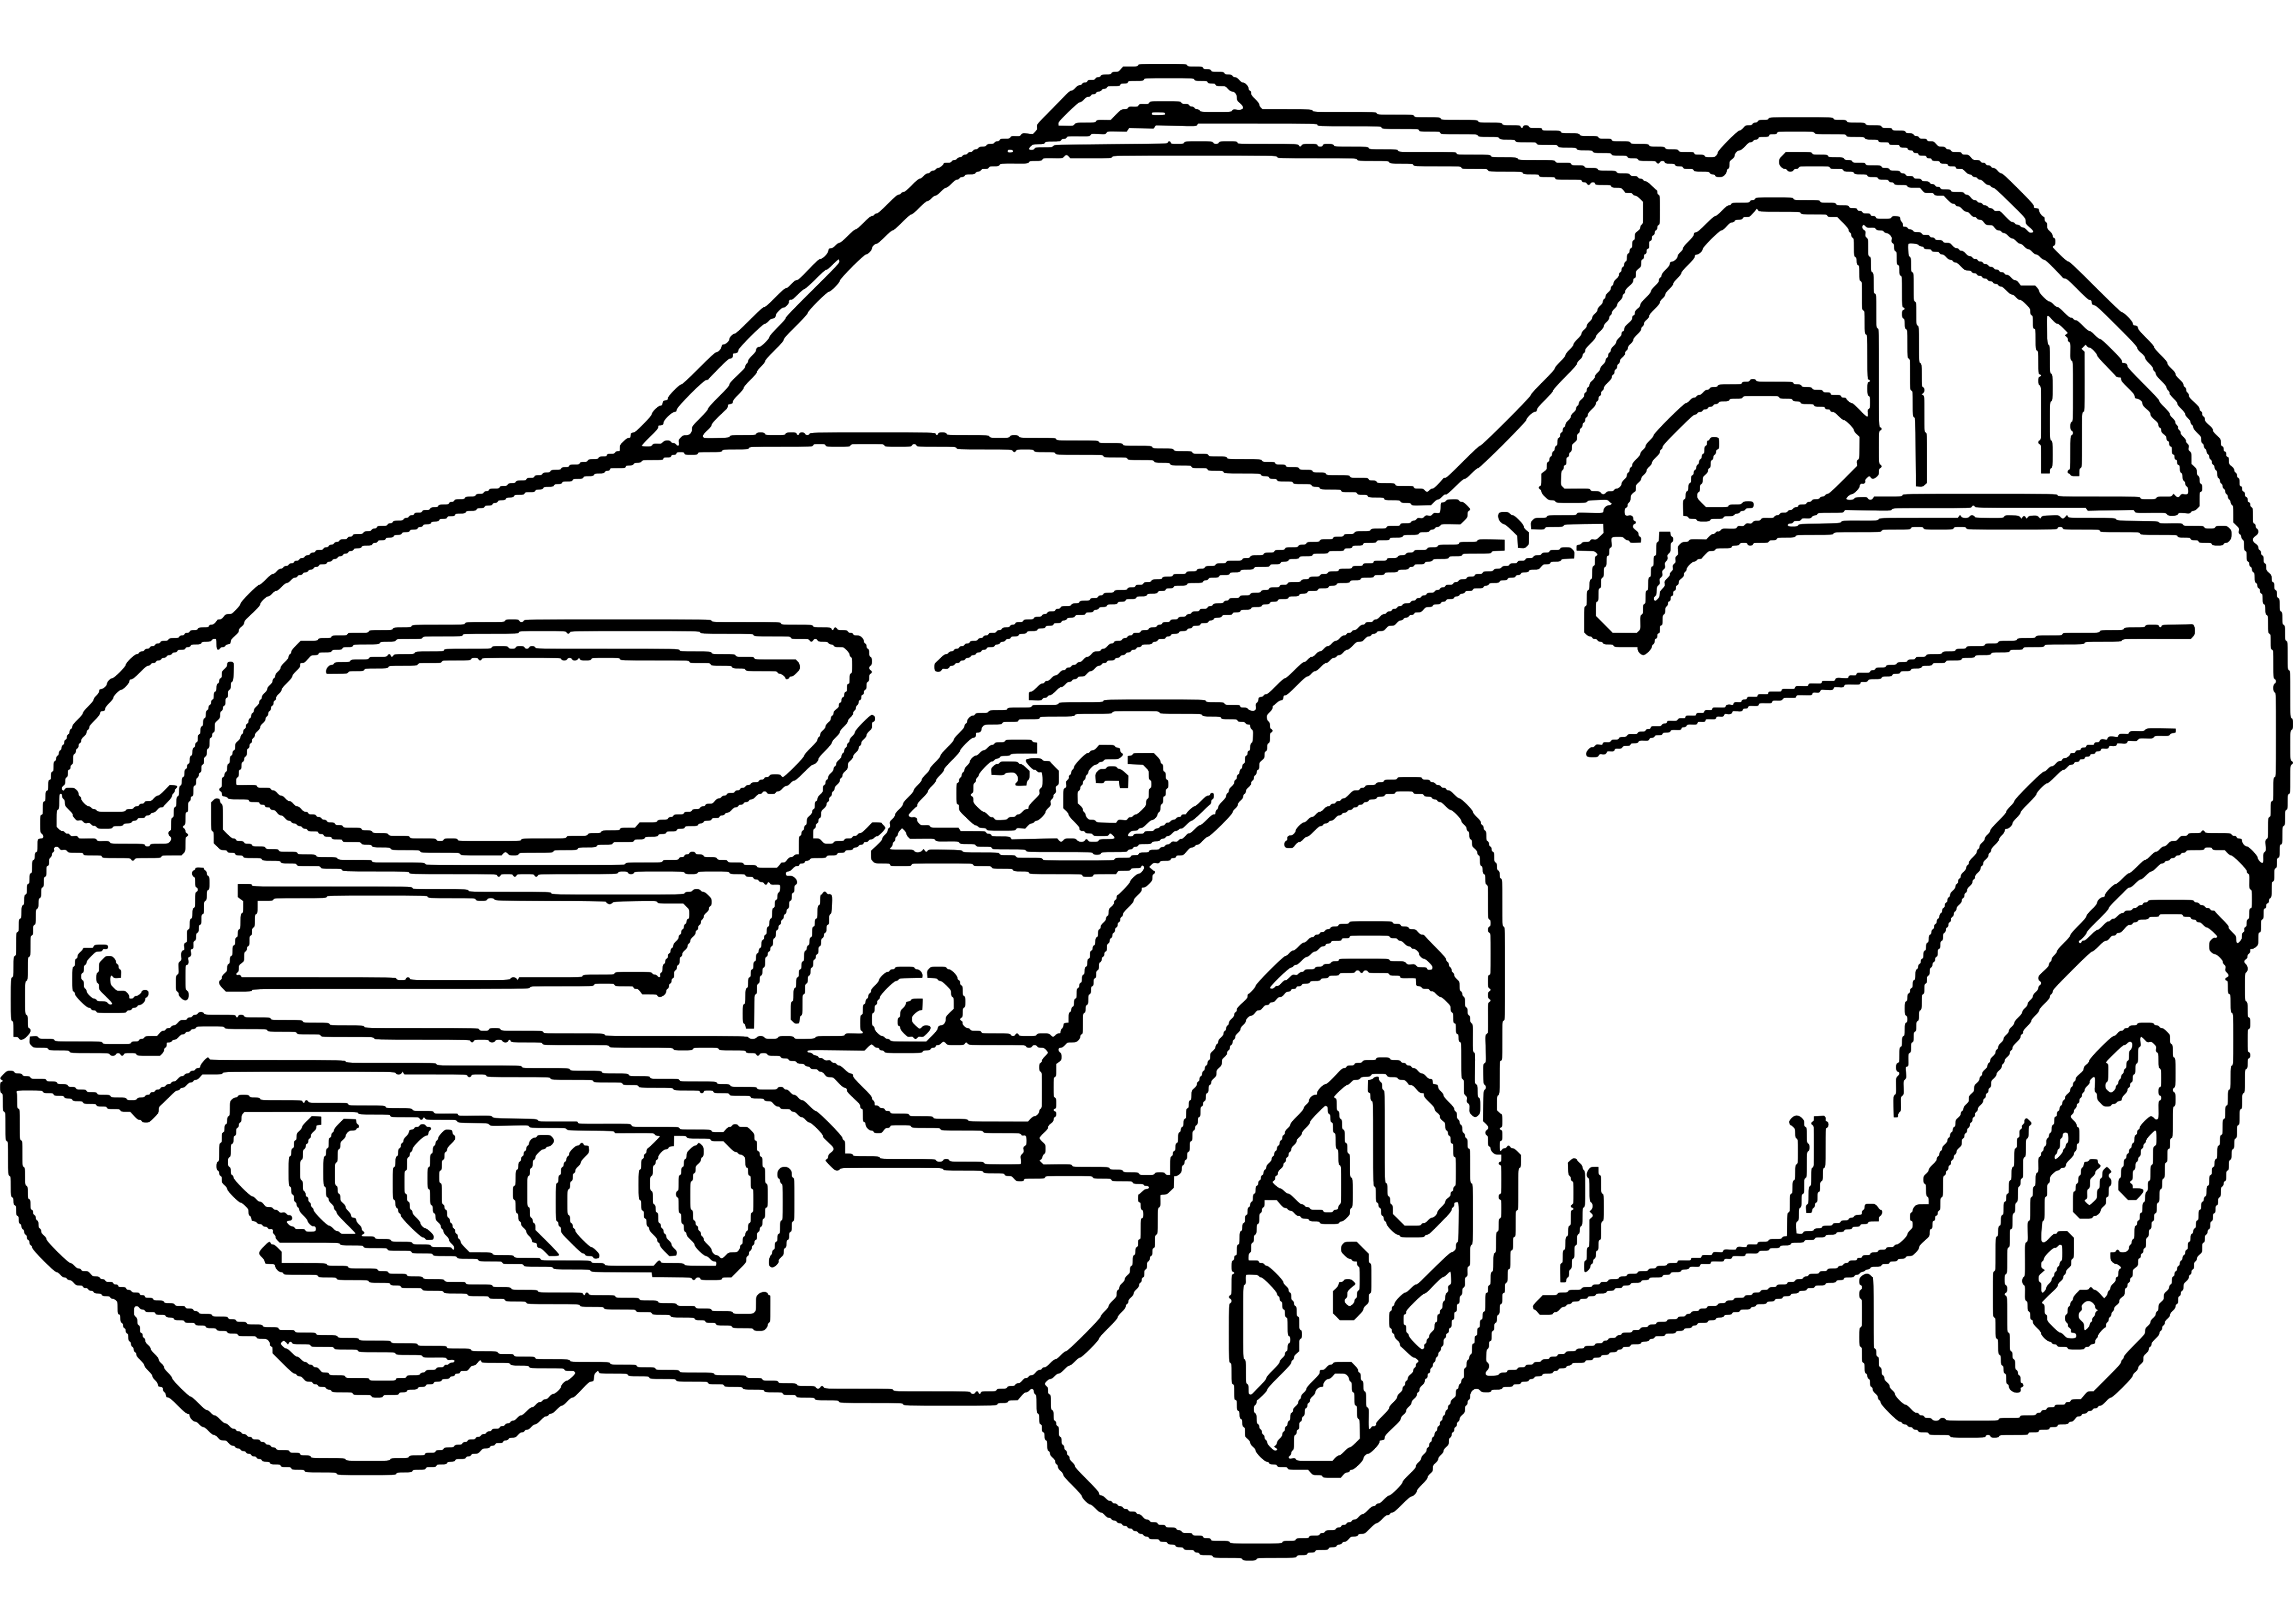 Download 4X4 (Transportation) - Page 2 - Printable coloring pages